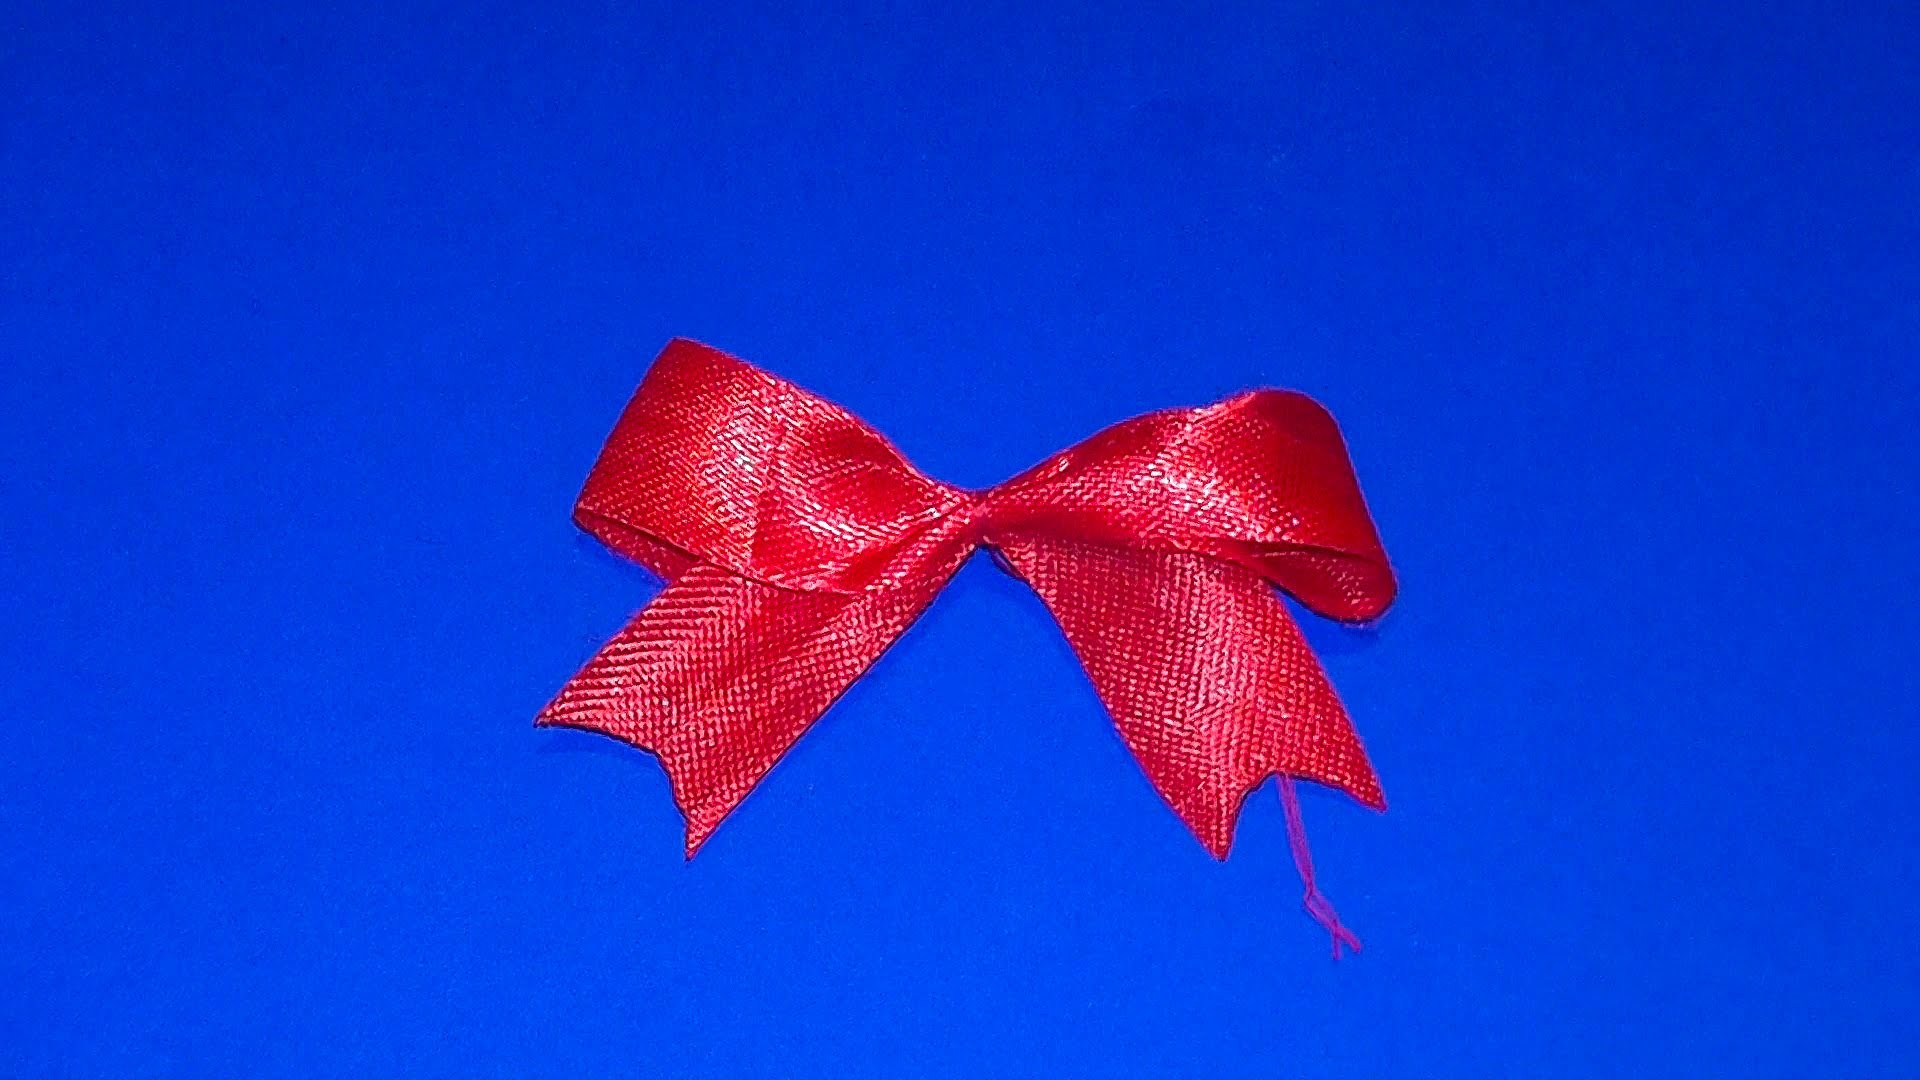 How to make a bowknot (a bow) for 3D origami models